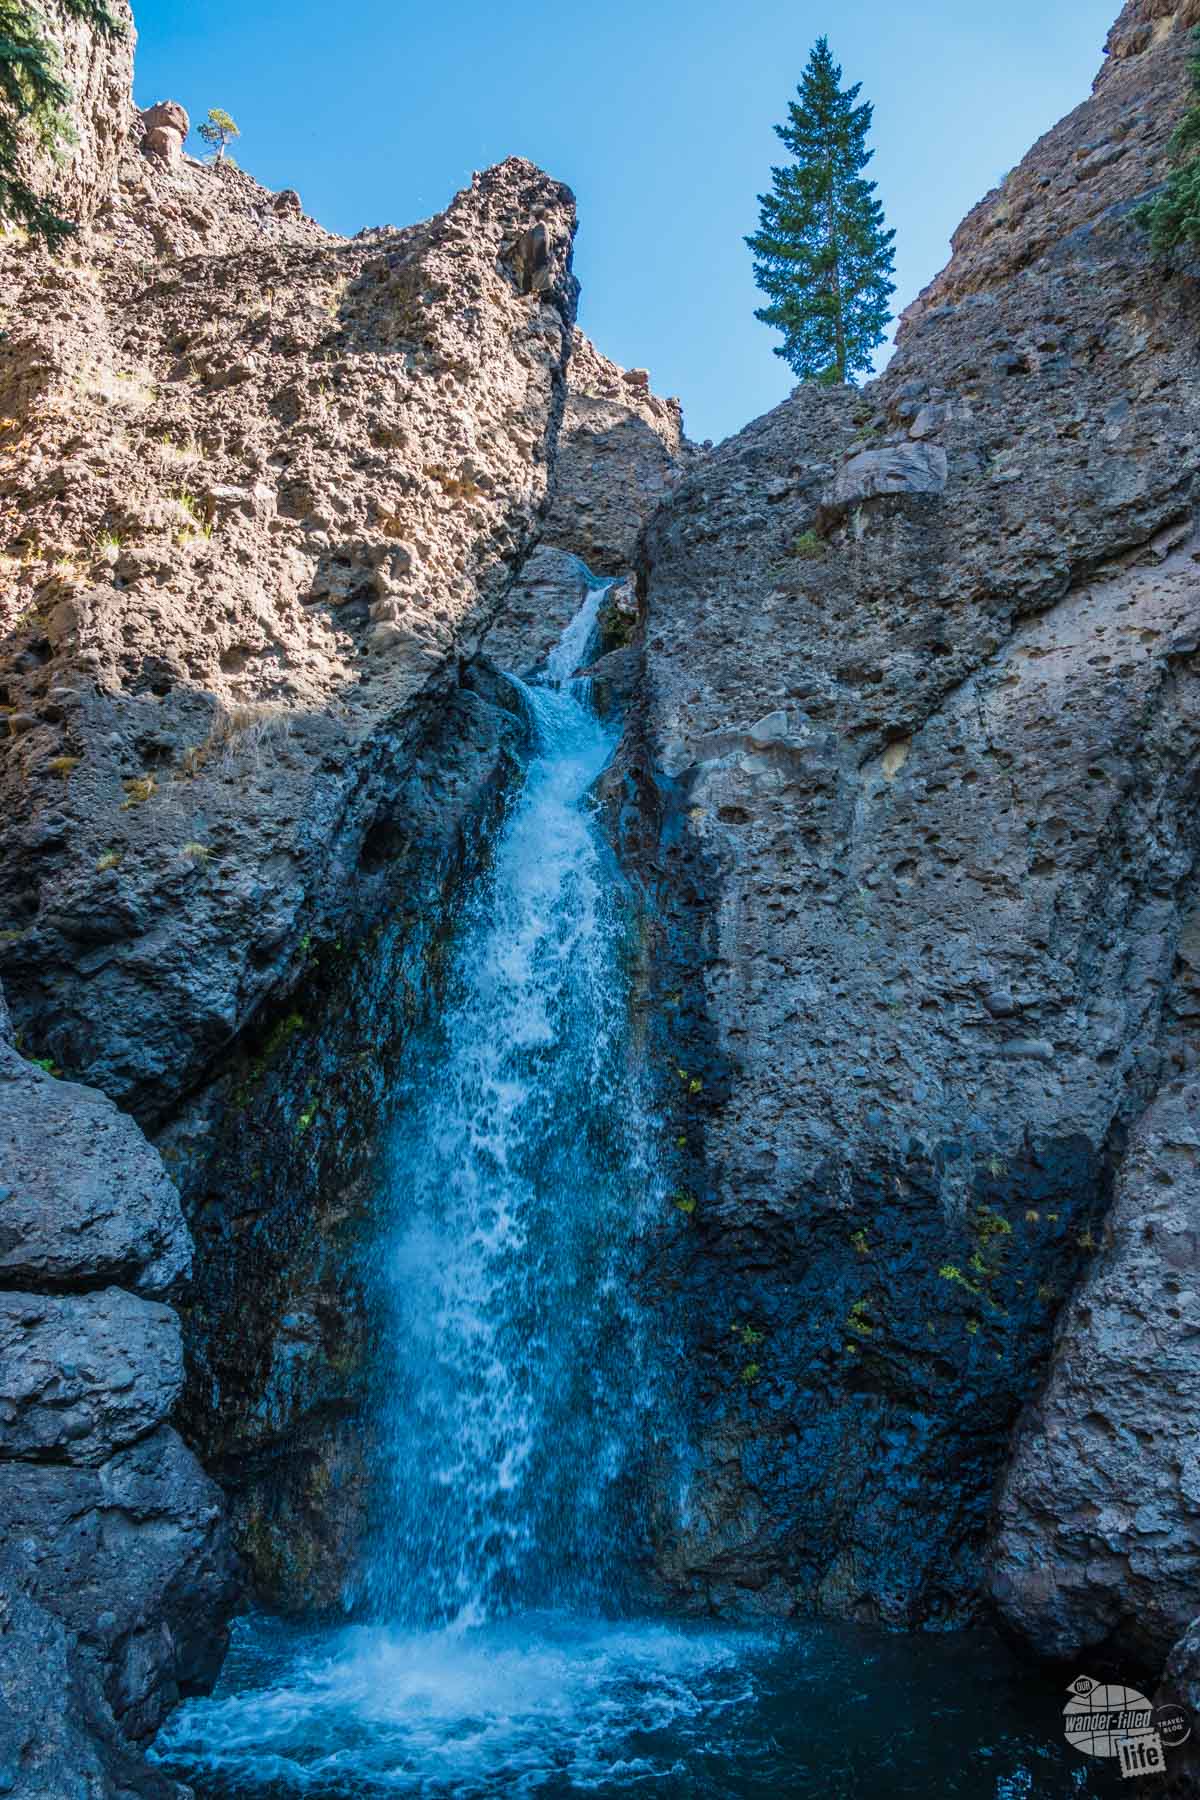 Piedra Falls is a relatively easy hike near Pagosa Springs.